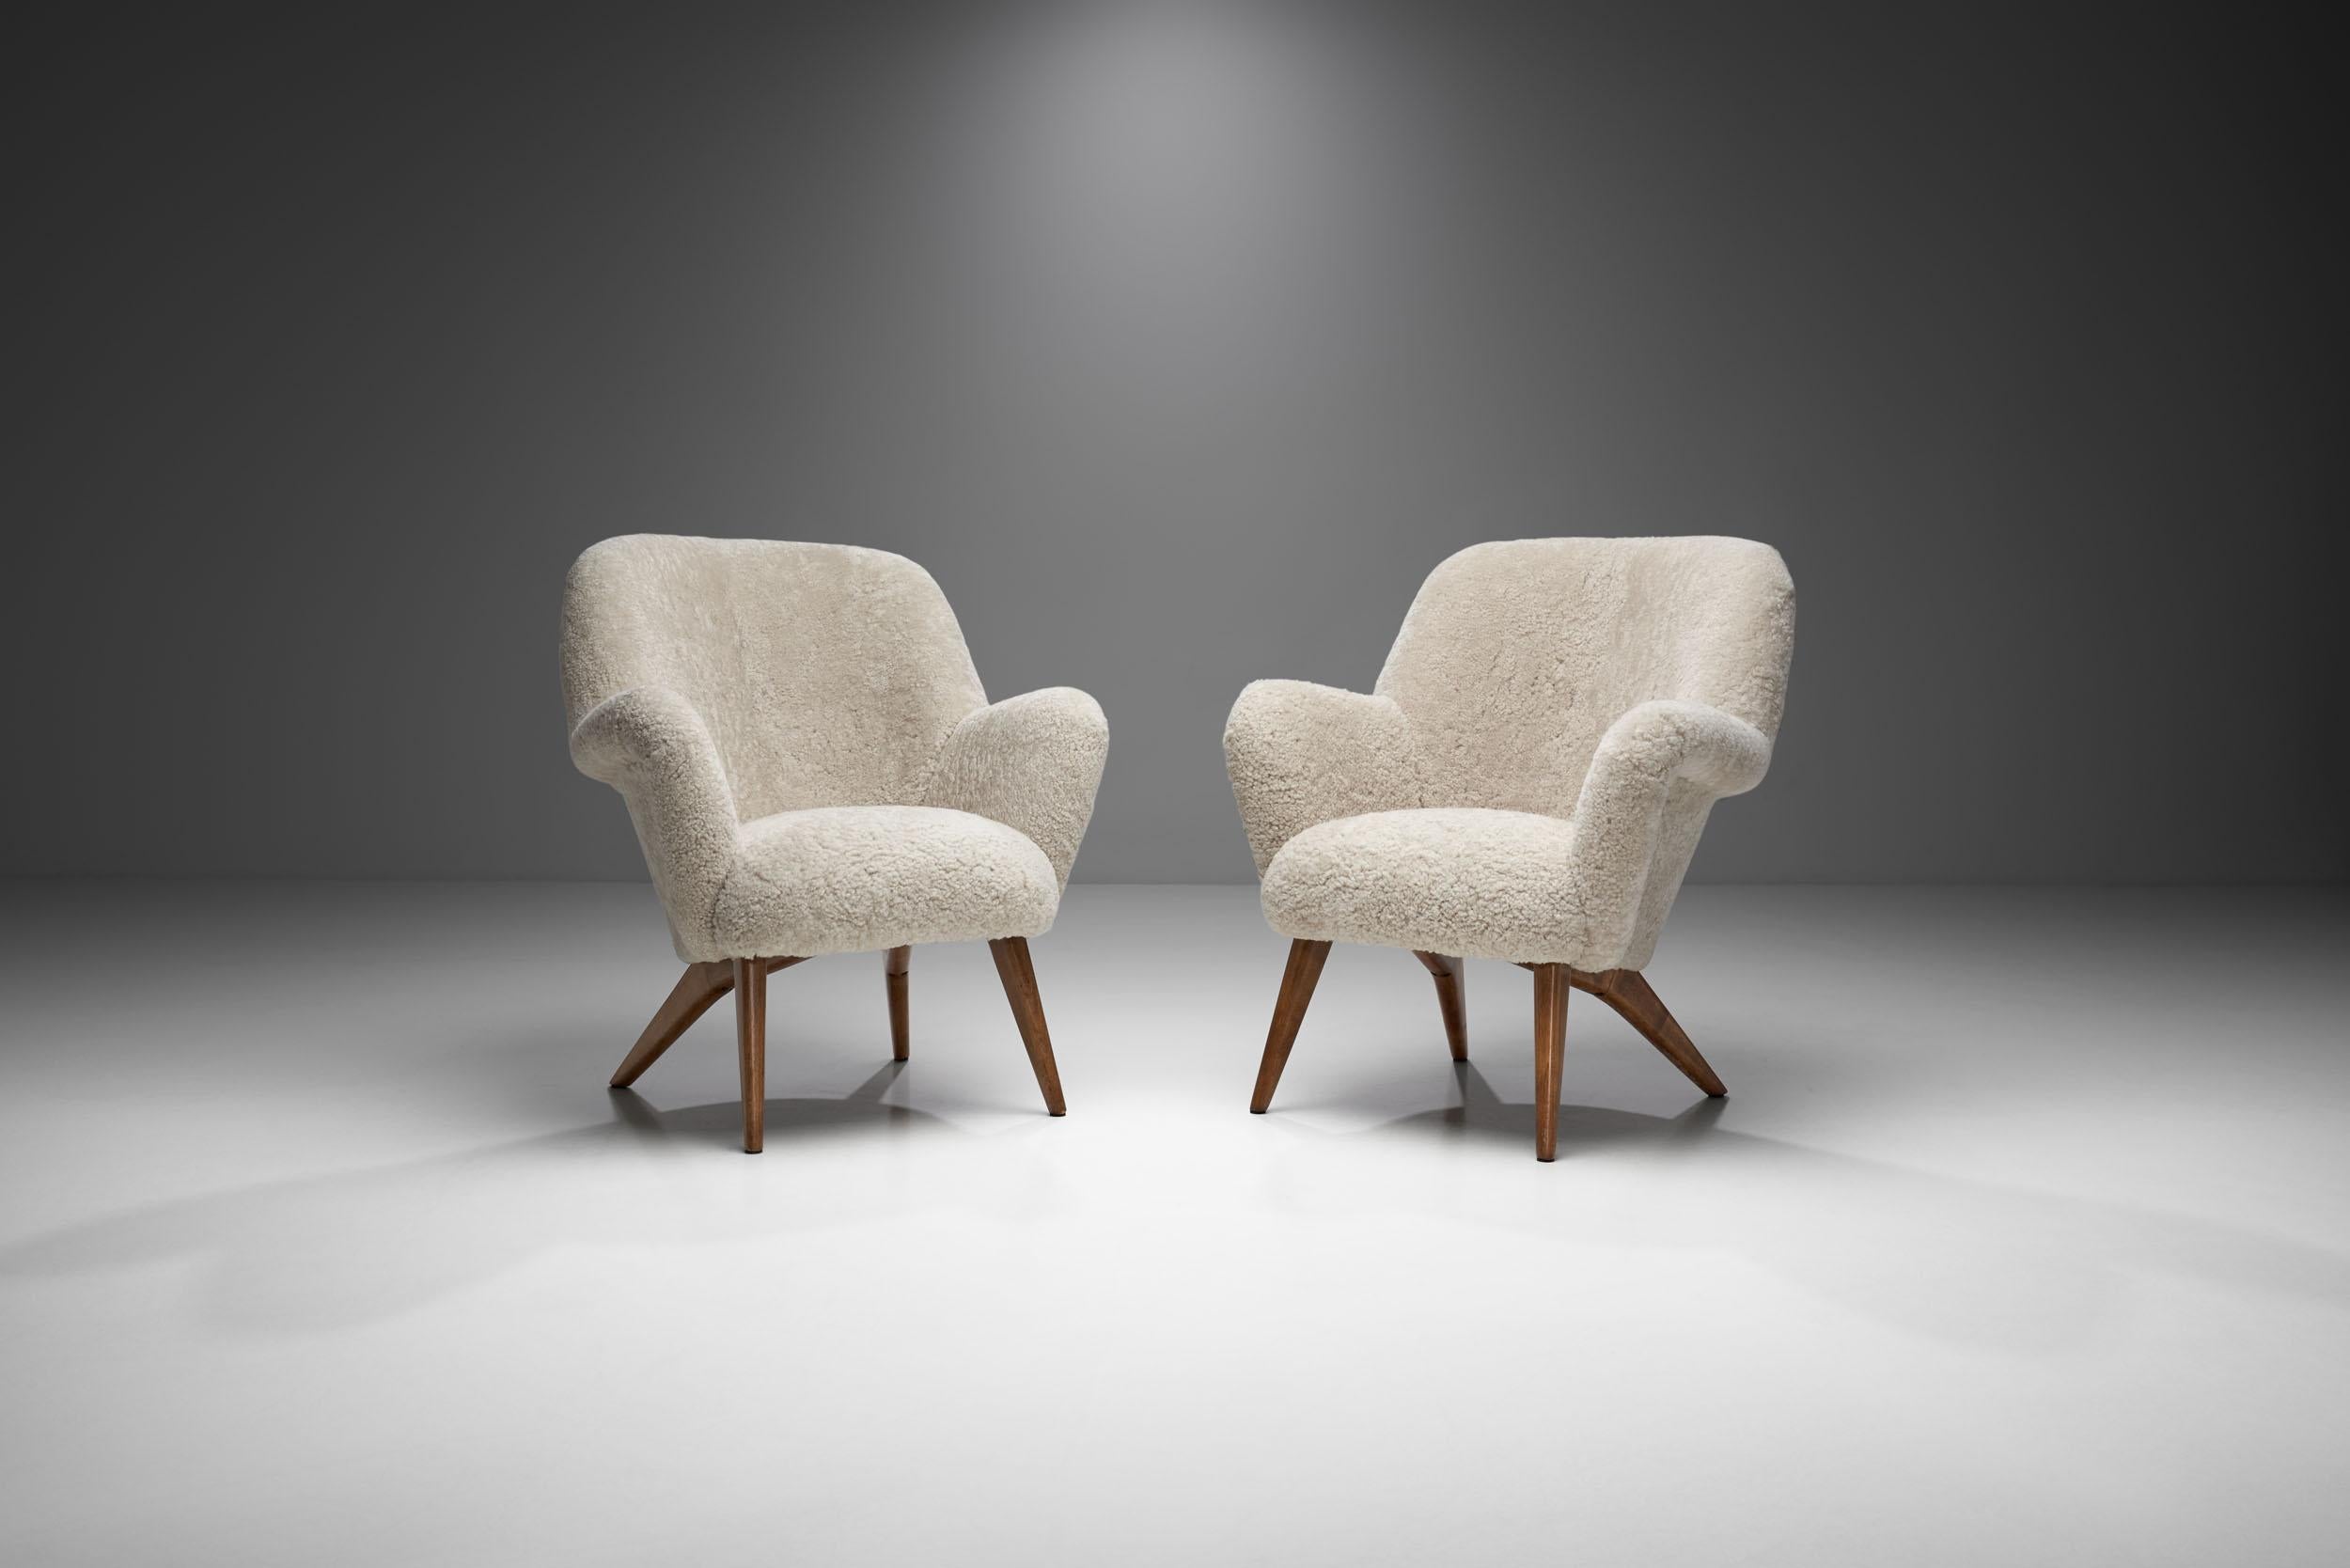 These “Pedro” armchairs show the homely curviness that defined the design of the 1950s. Hiort af Ornäs developed this model for his own furniture company, Puunveisto Oy.

The Pedro model has a soft, sculptural shape paired with an ergonomic